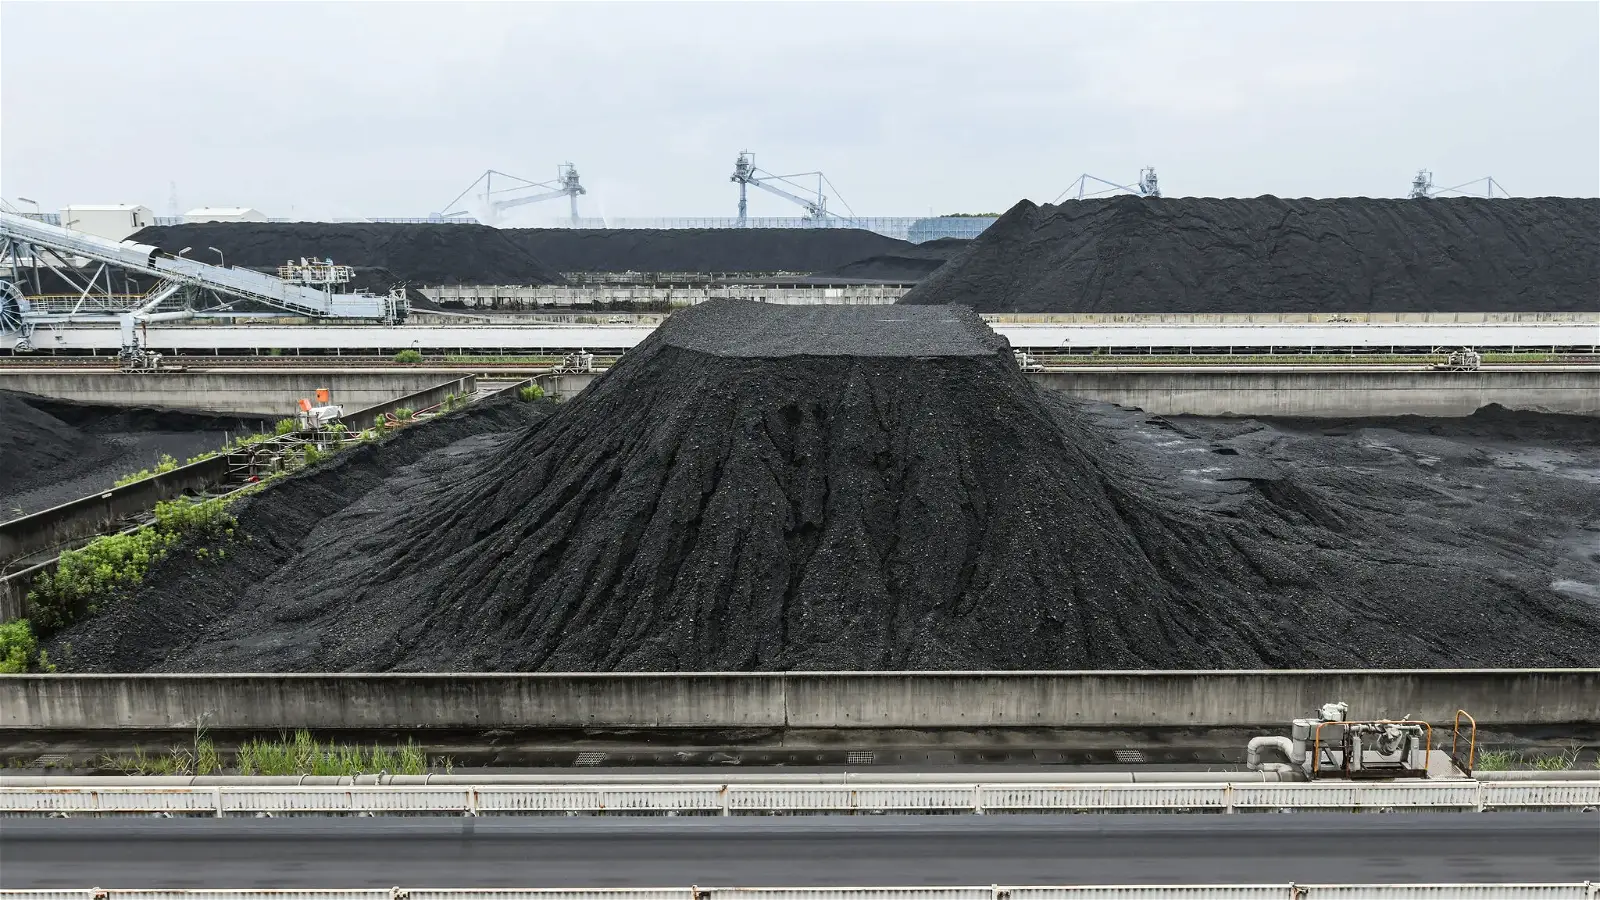 Japan is trying to use ammonia to make coal cleaner